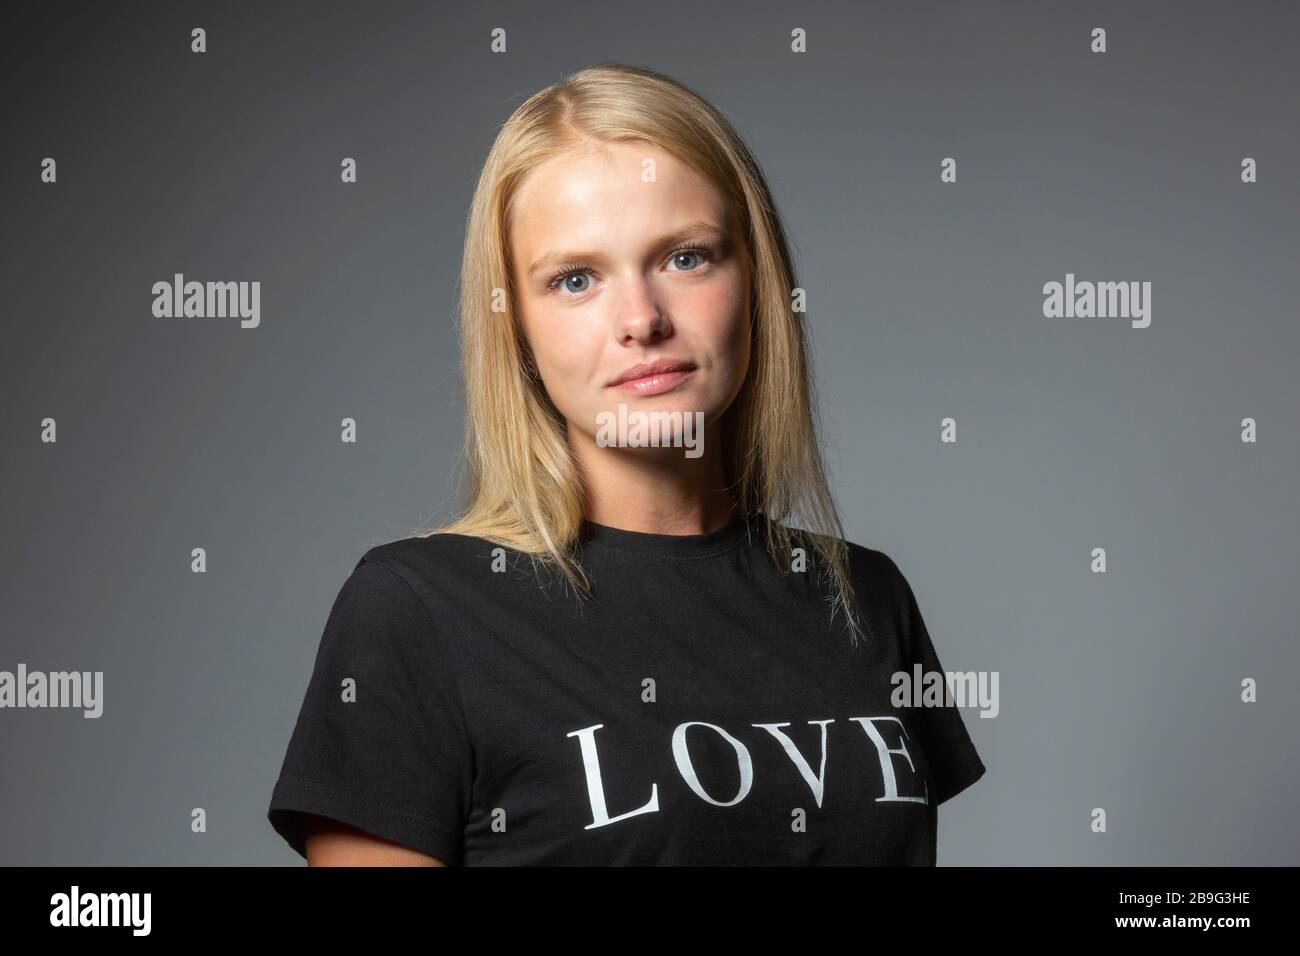 Portrait confident young woman in love t-shirt on gray background Stock Photo